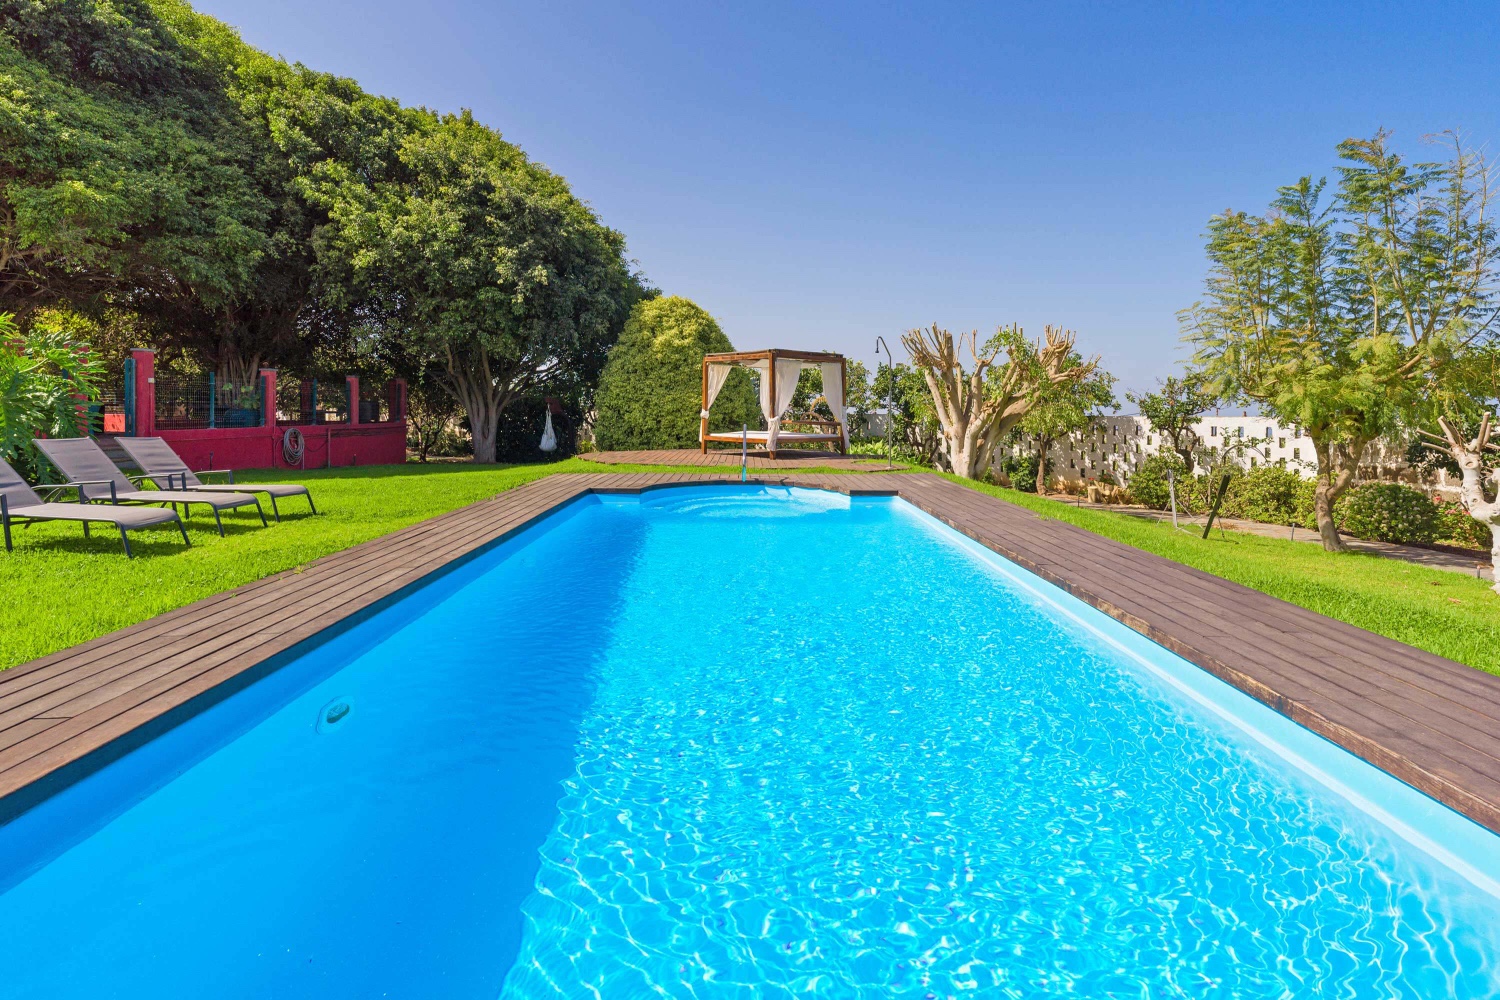 Luxurious 5 bedroom mansion with private pool and tennis court in the beautiful area of Arucas in the north of the island